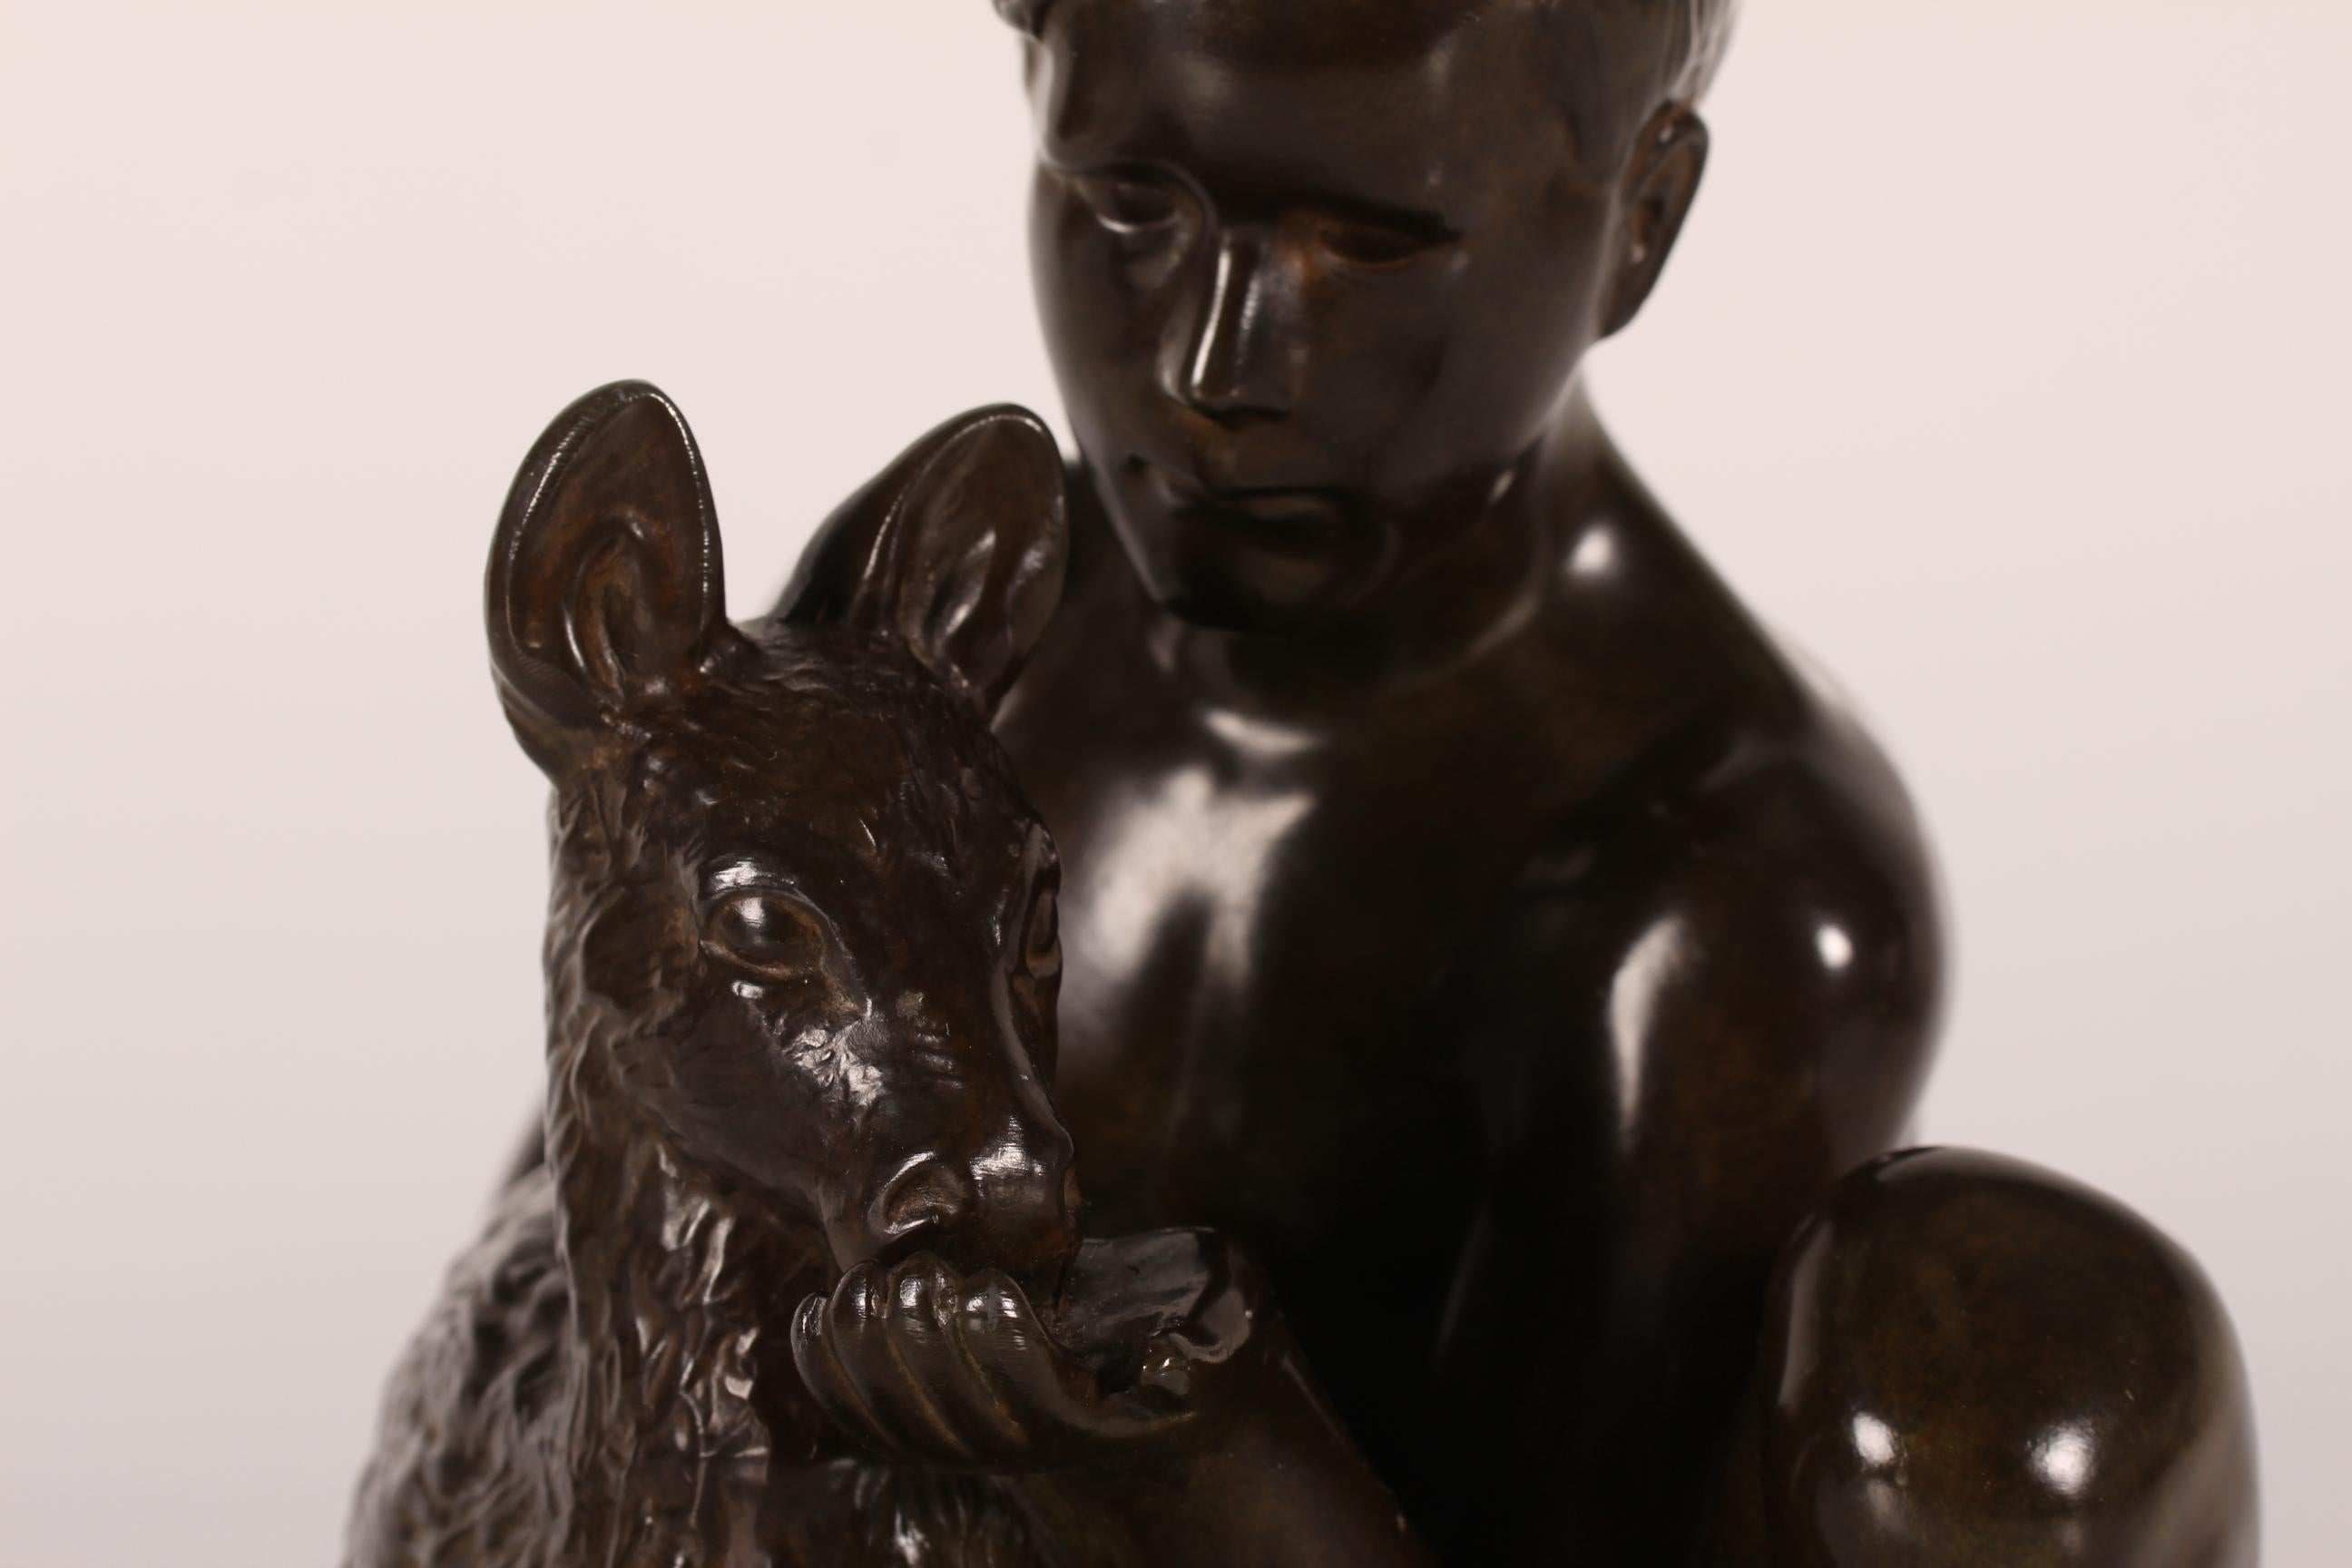 Original figurine designed by Danish artist and sculptor Just Andersen (1884-1943) featuring a young shepherd feeding a lamb.
It's made in Denmark in the 1940s or 1950s of Just Andersens own disco metal with brown patina.
Sign. Just A. + model